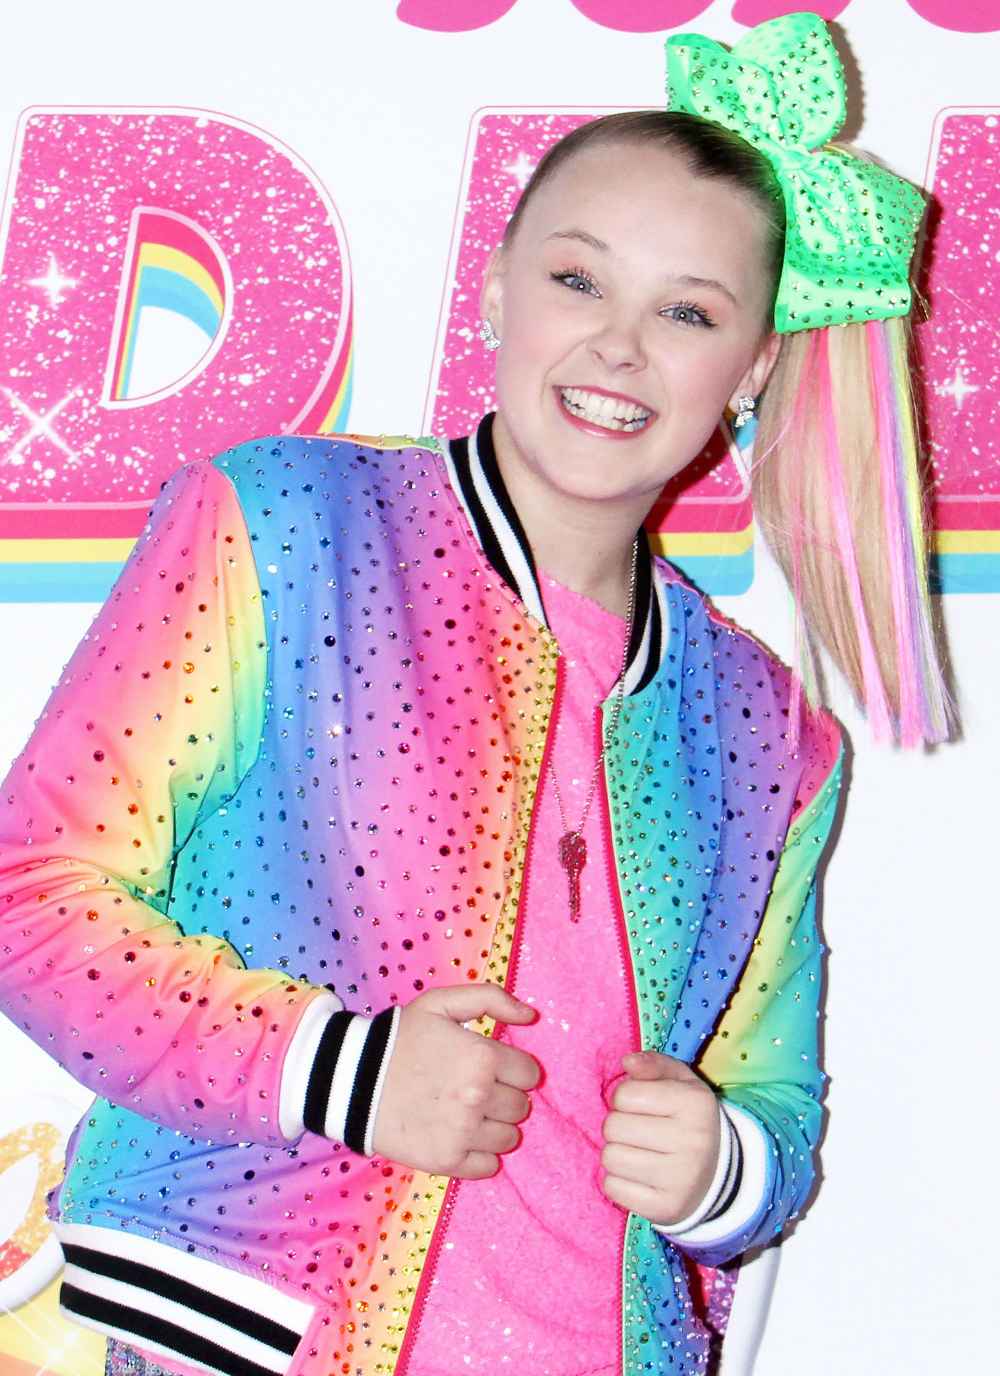 Surprise! JoJo Siwa Changes Her Hair Color for the 2nd Time in a Week